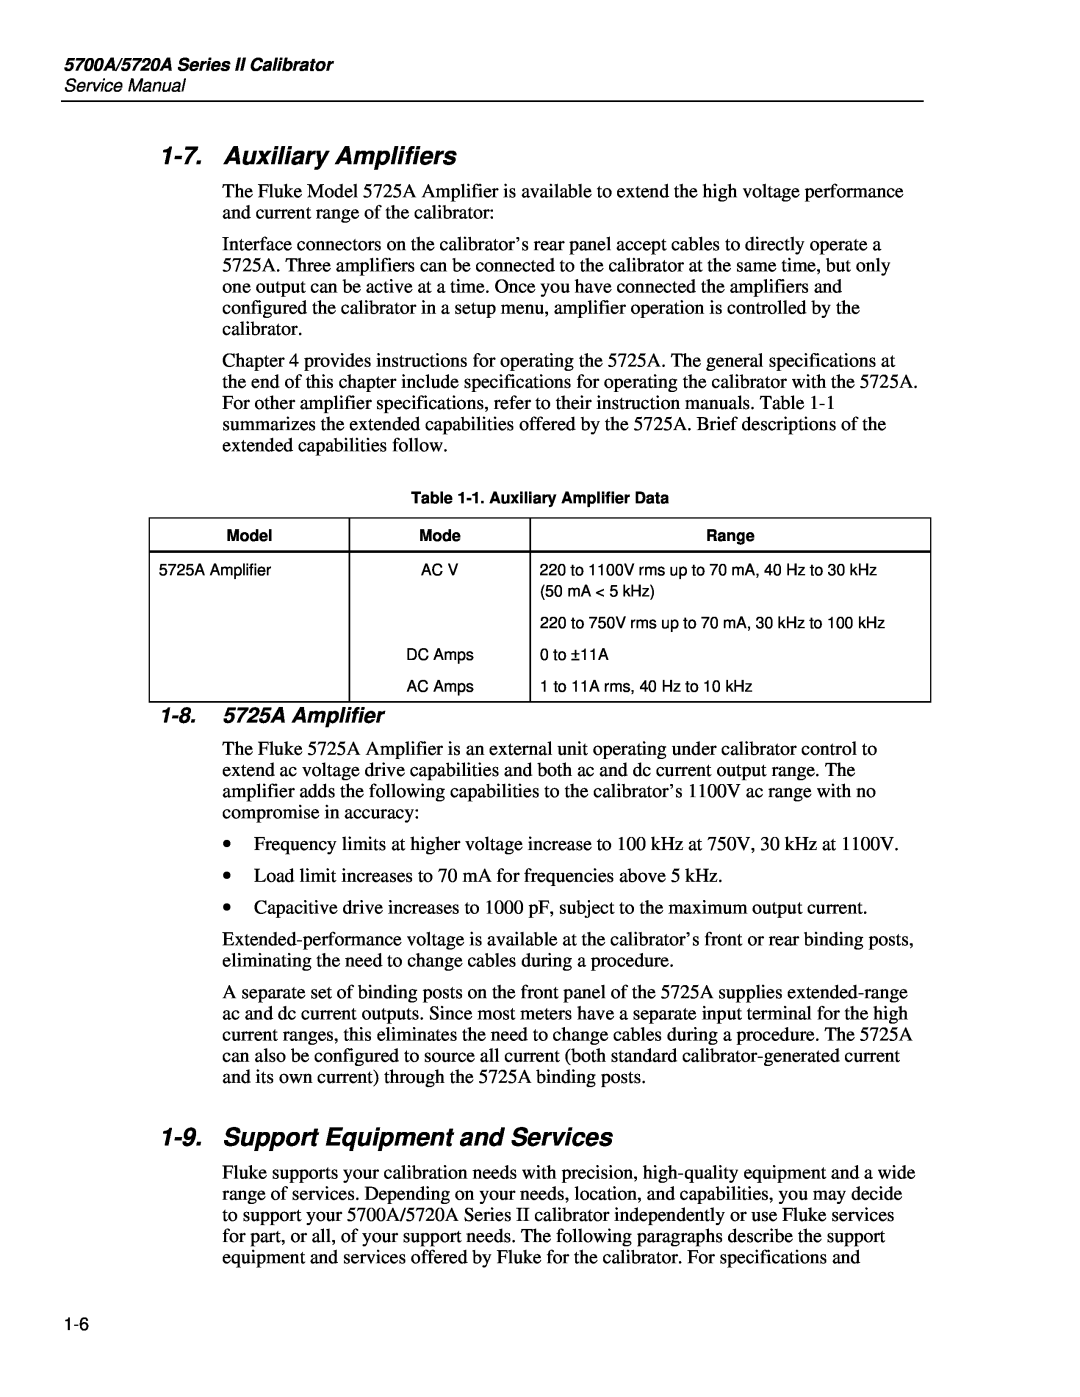 Fluke 5720A service manual Auxiliary Amplifiers, Support Equipment and Services, 1-8. 5725A Amplifier 